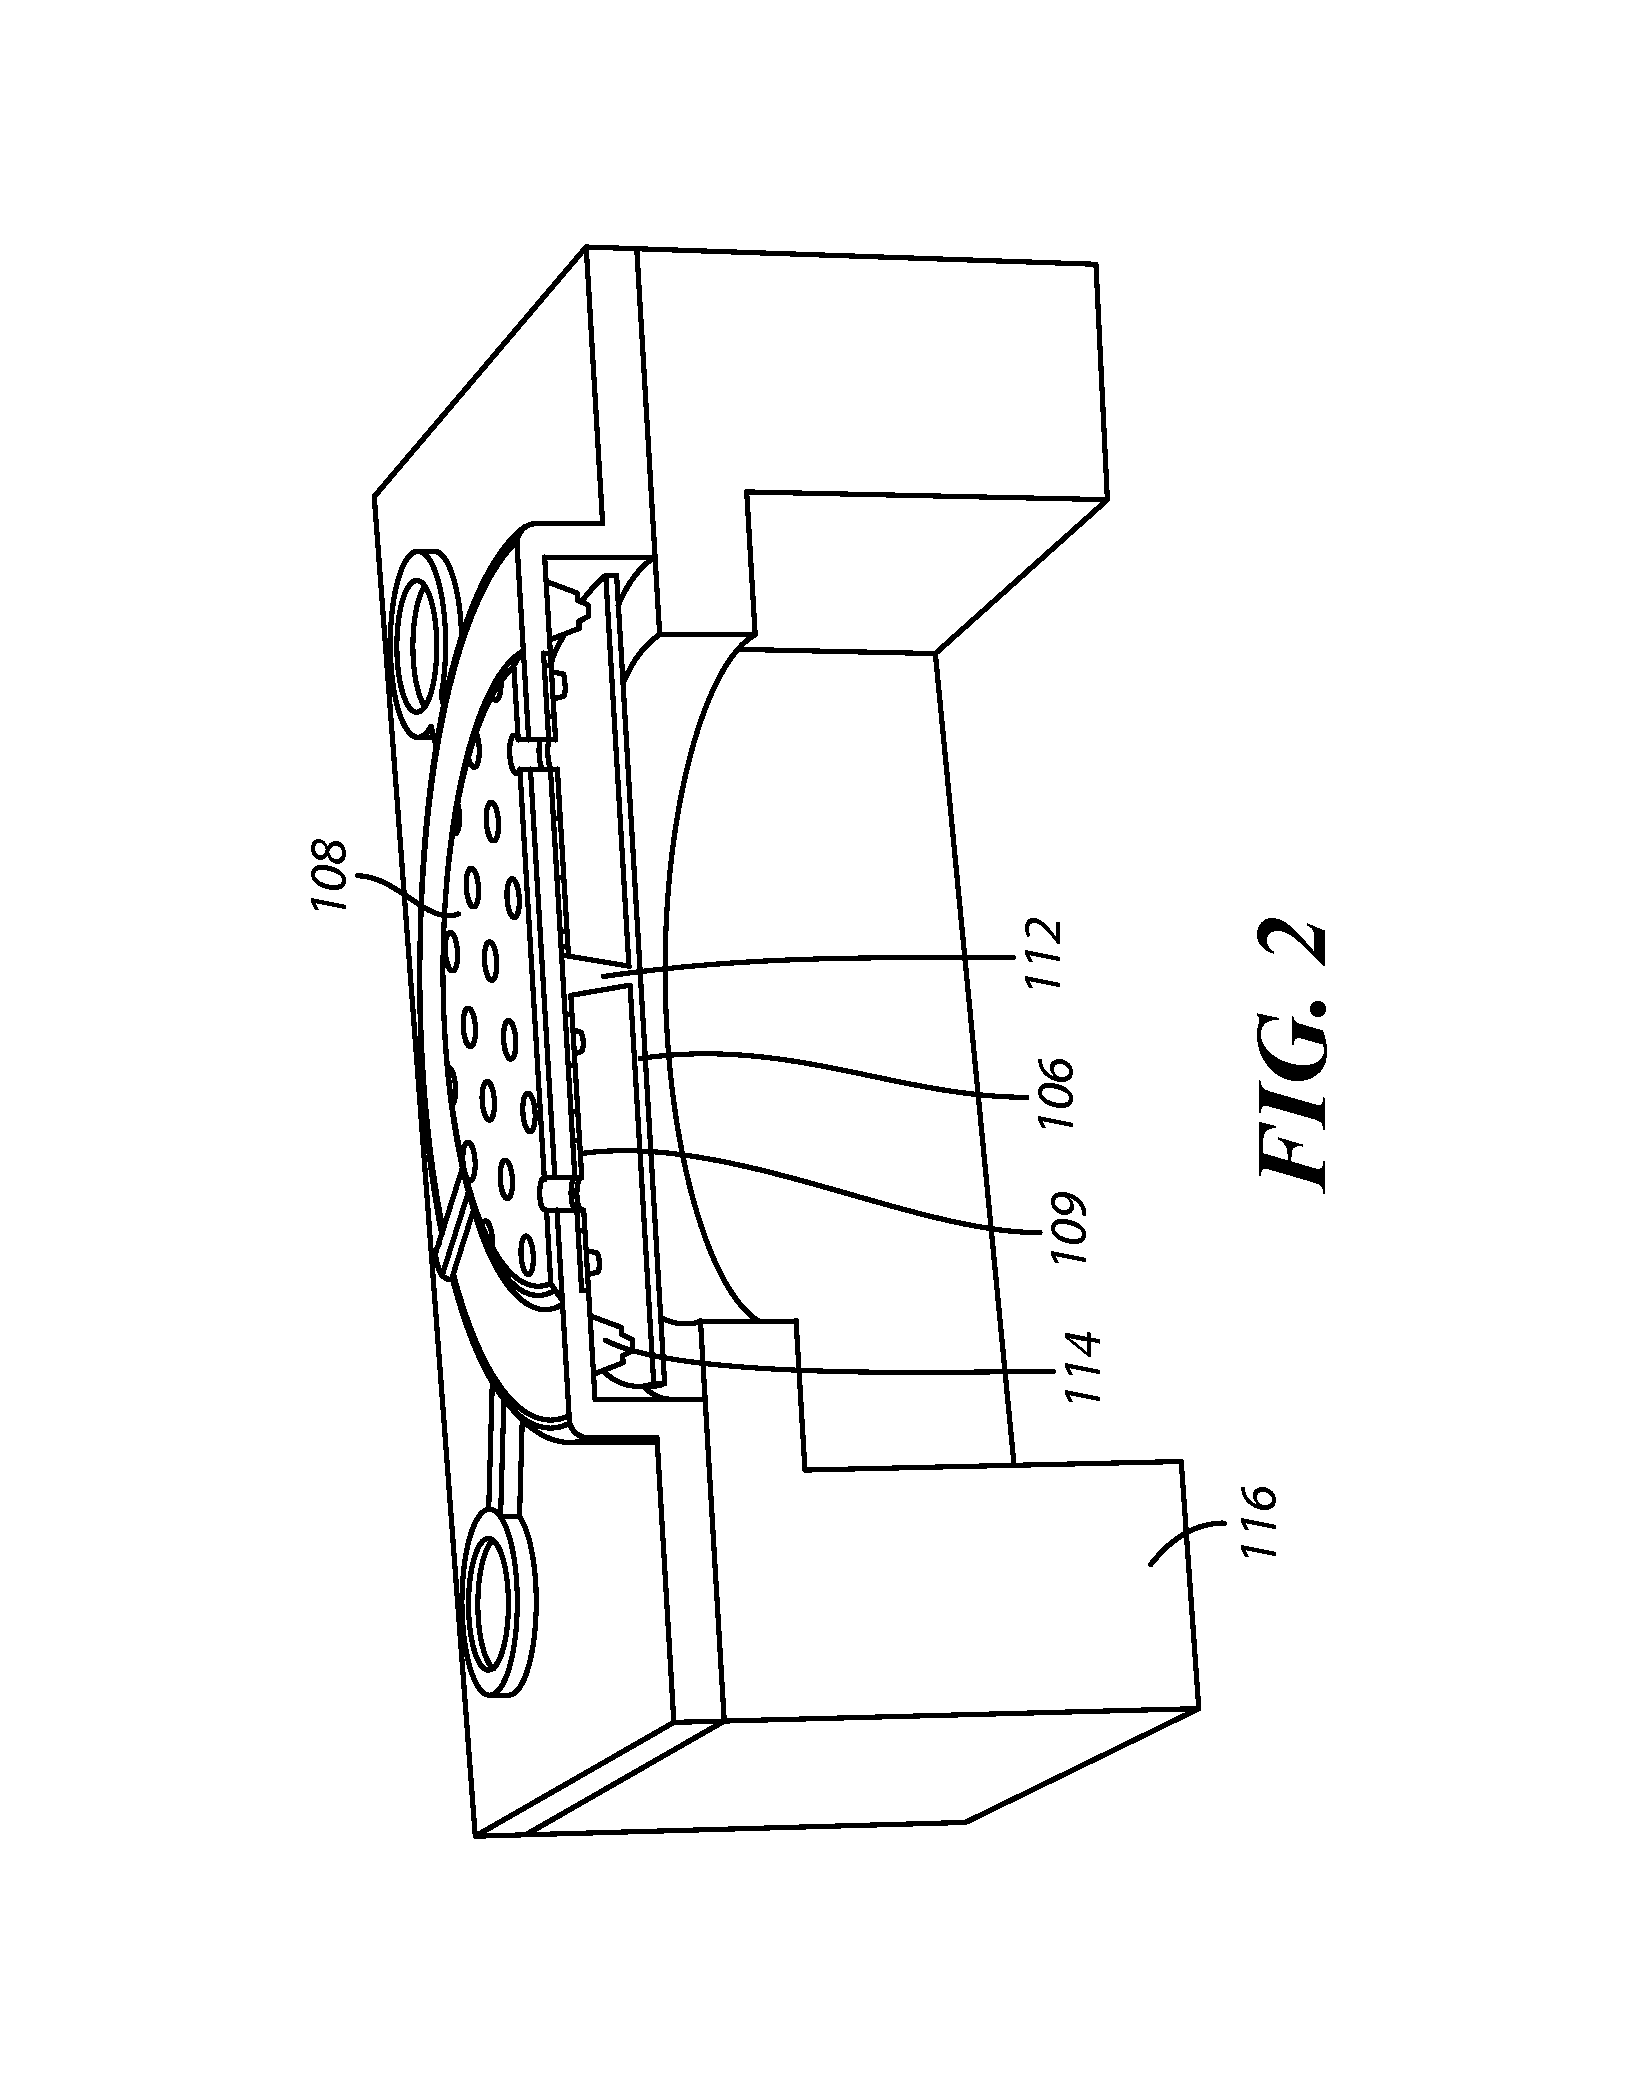 Acoustic apparatus with diaphragm supported at a discrete number of locations